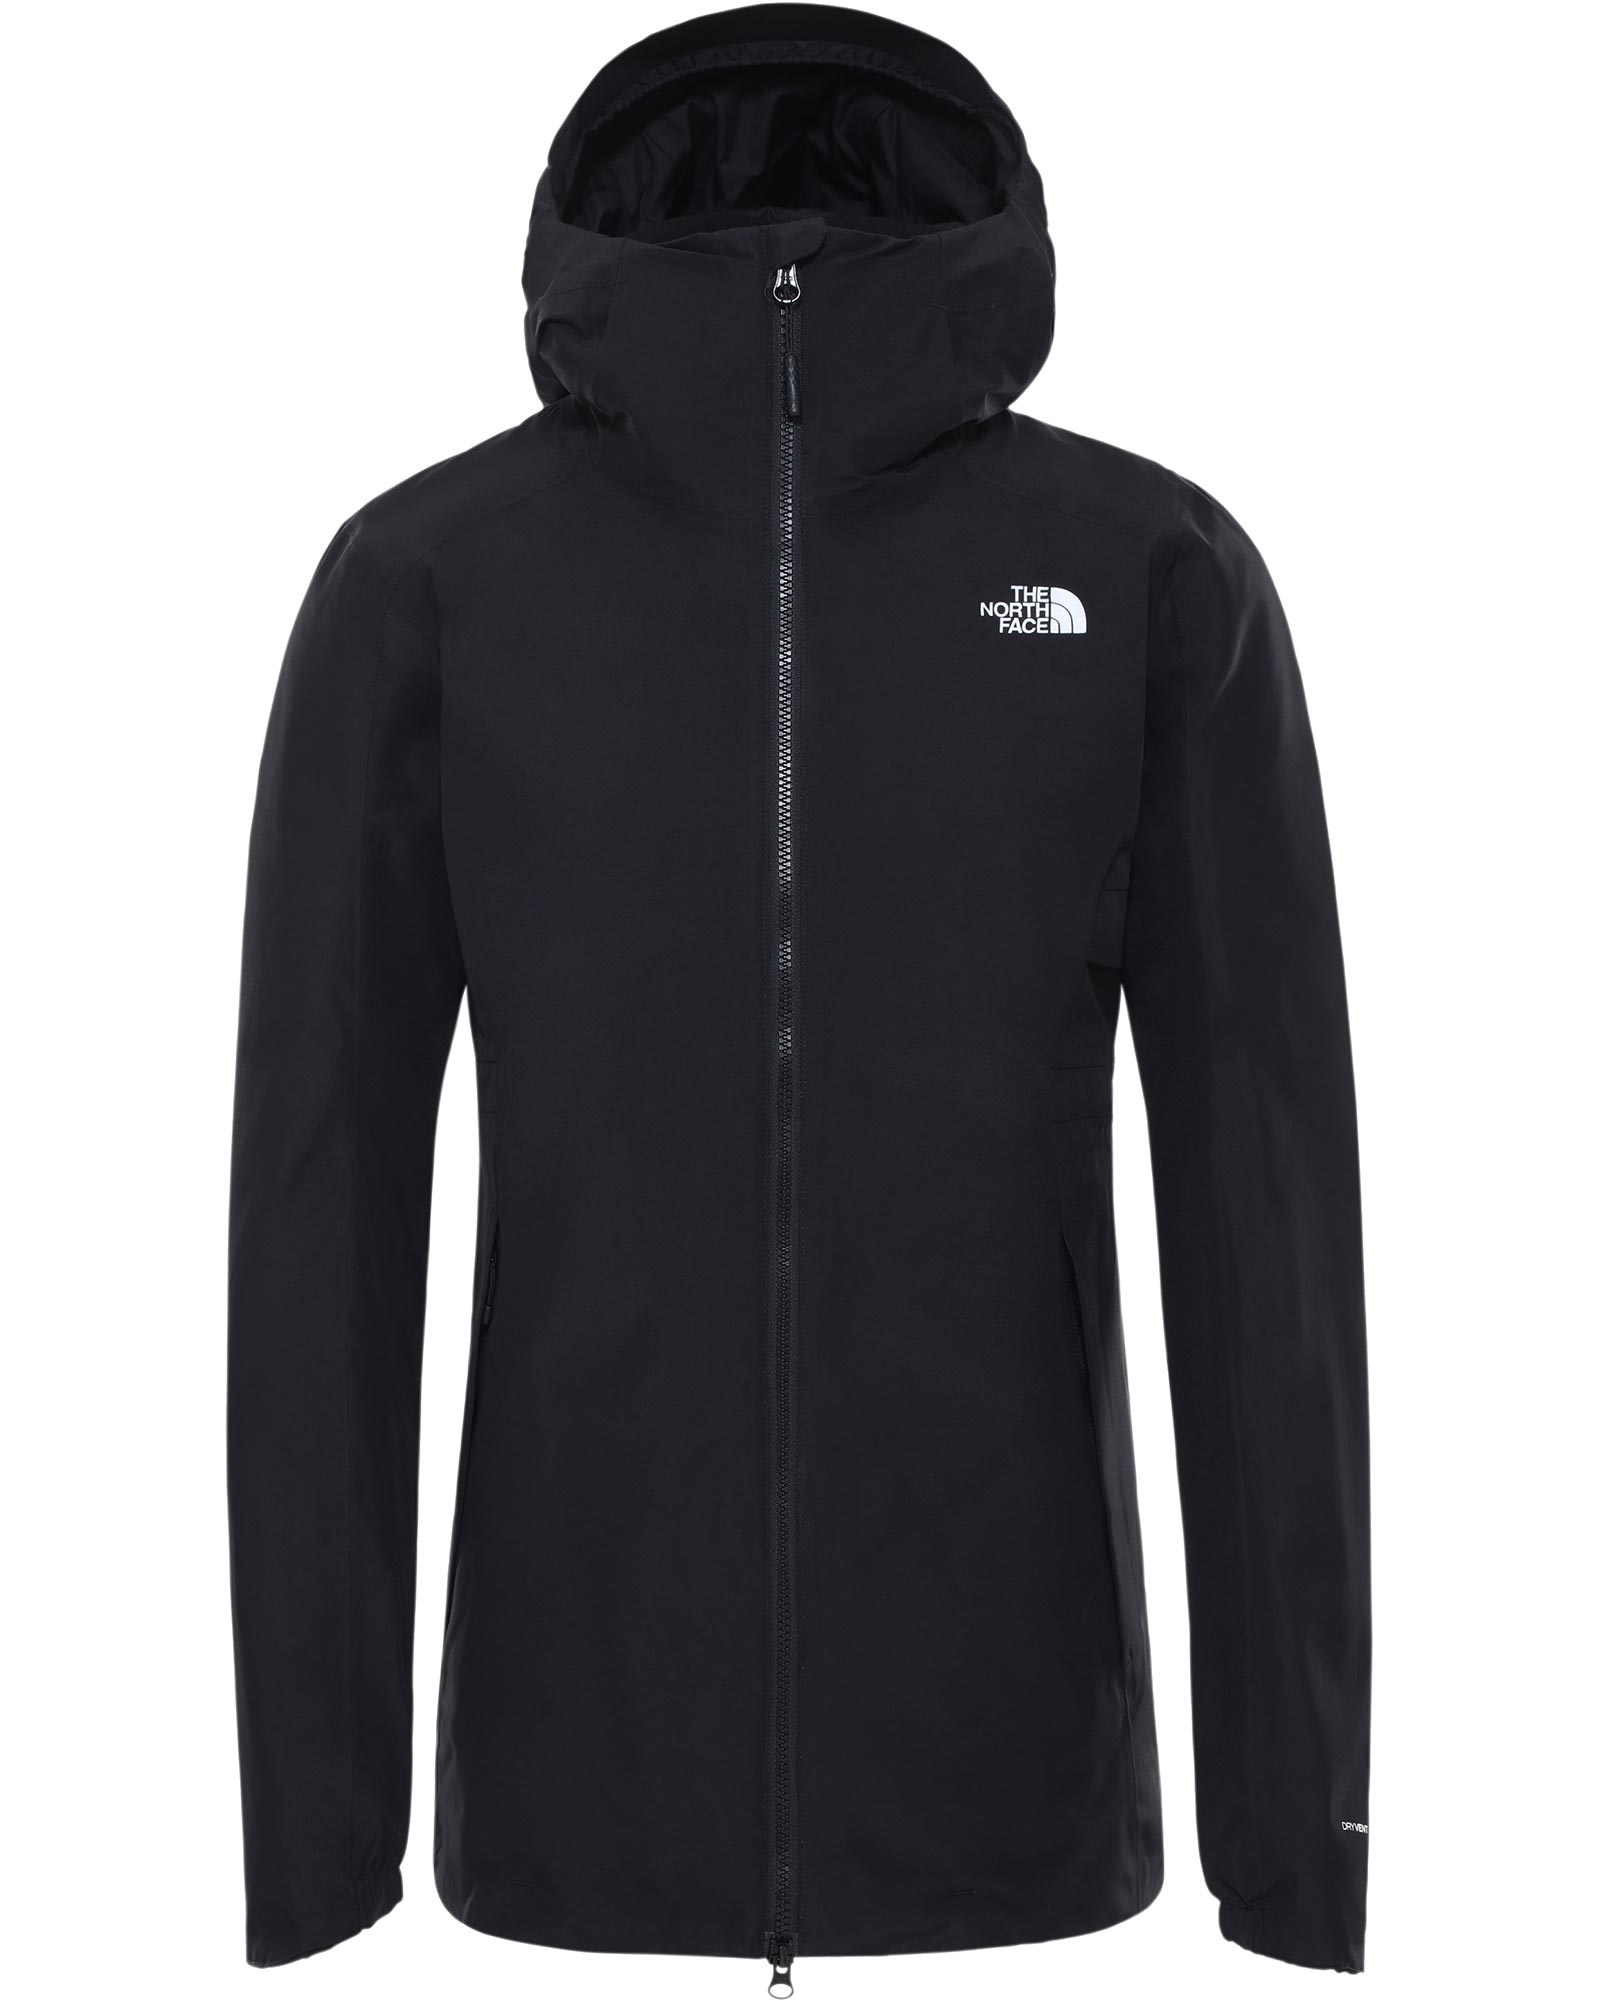 The North Face Hikesteller Women’s Insulated Parka Jacket - TNF Black XS